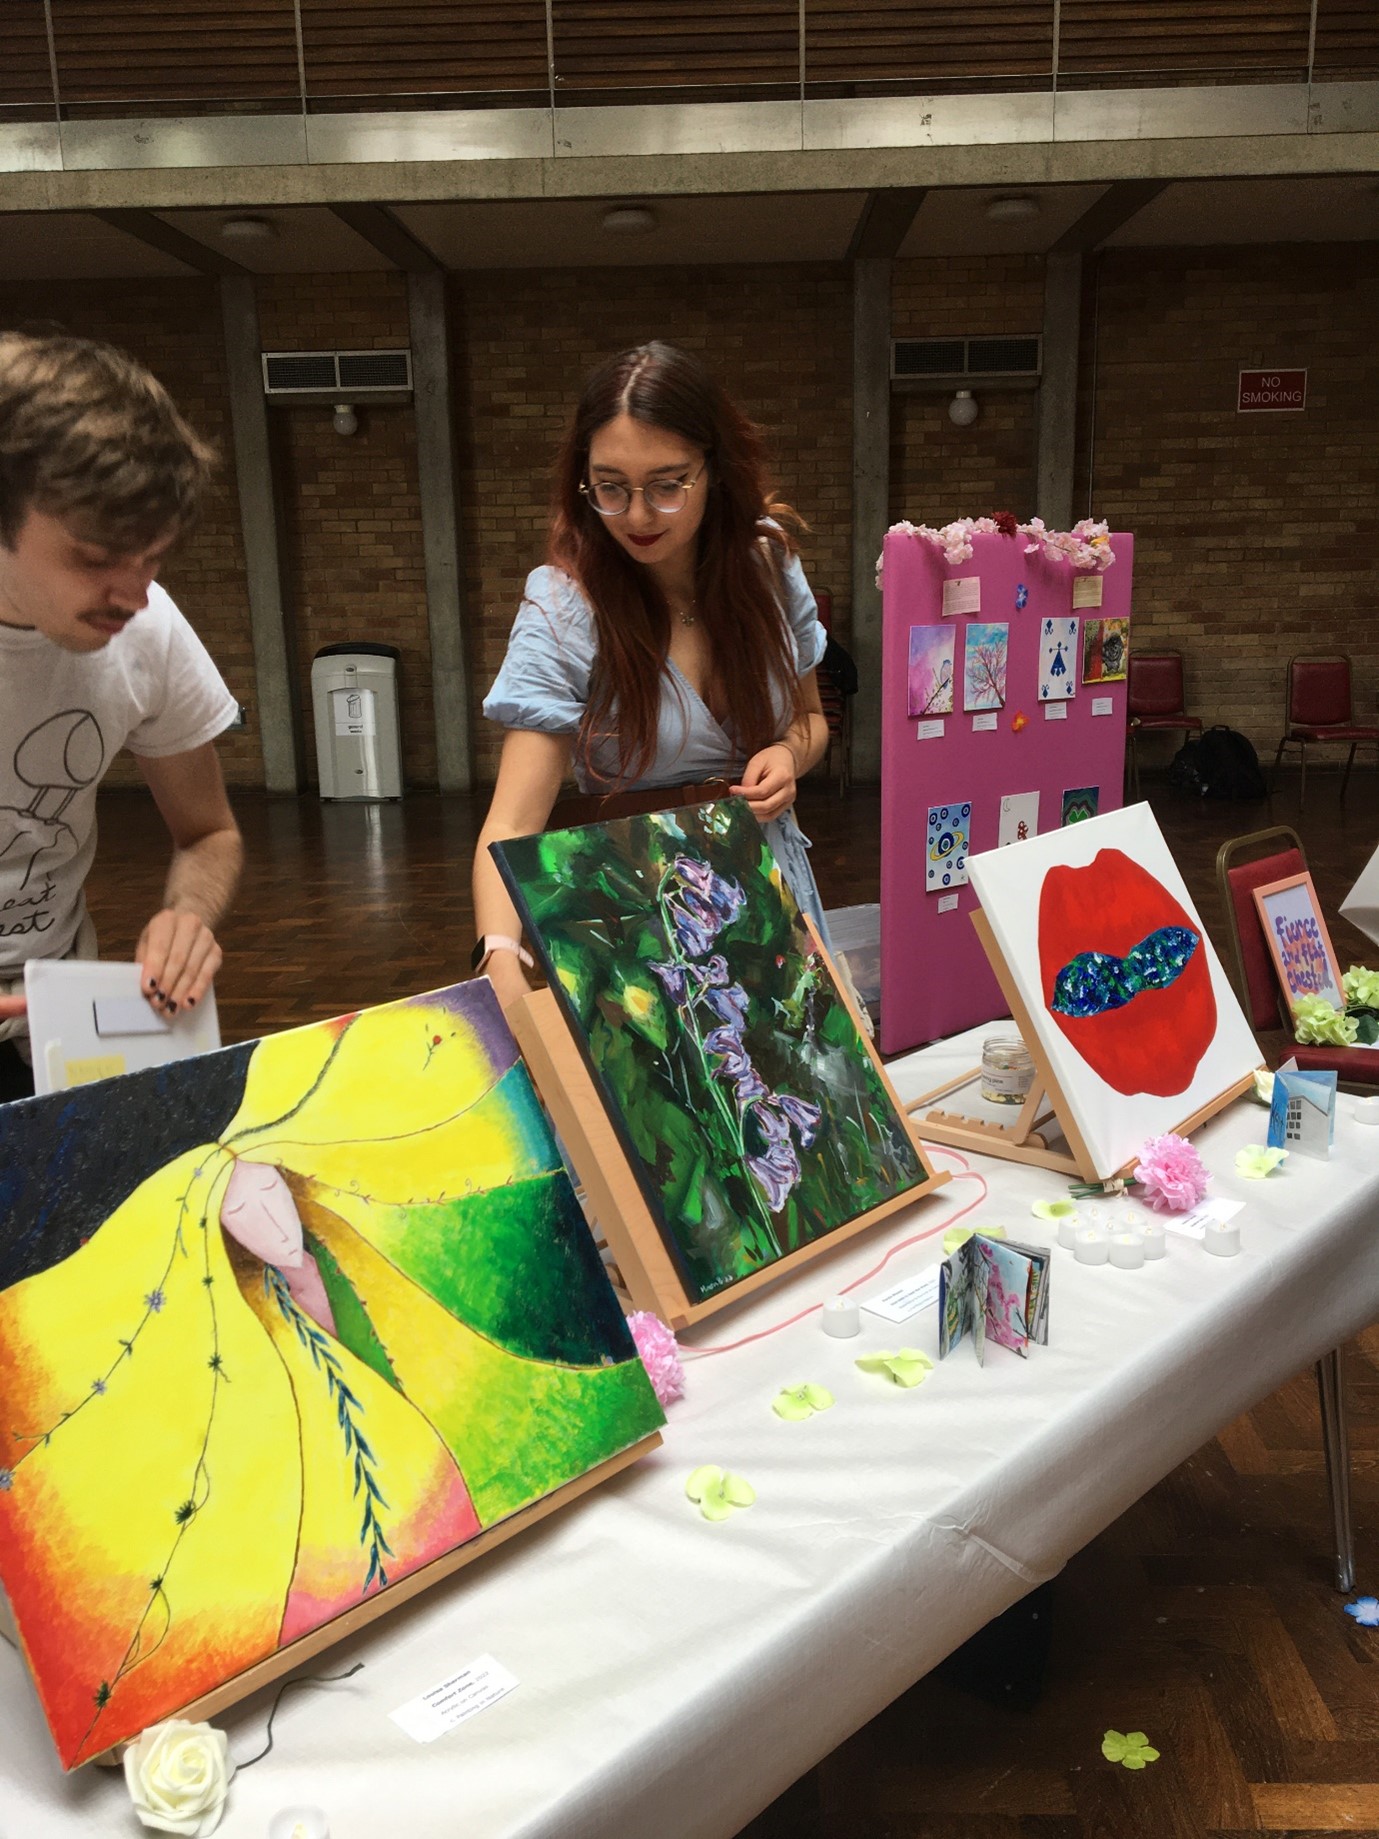 Two students arranging their artworks on tables.